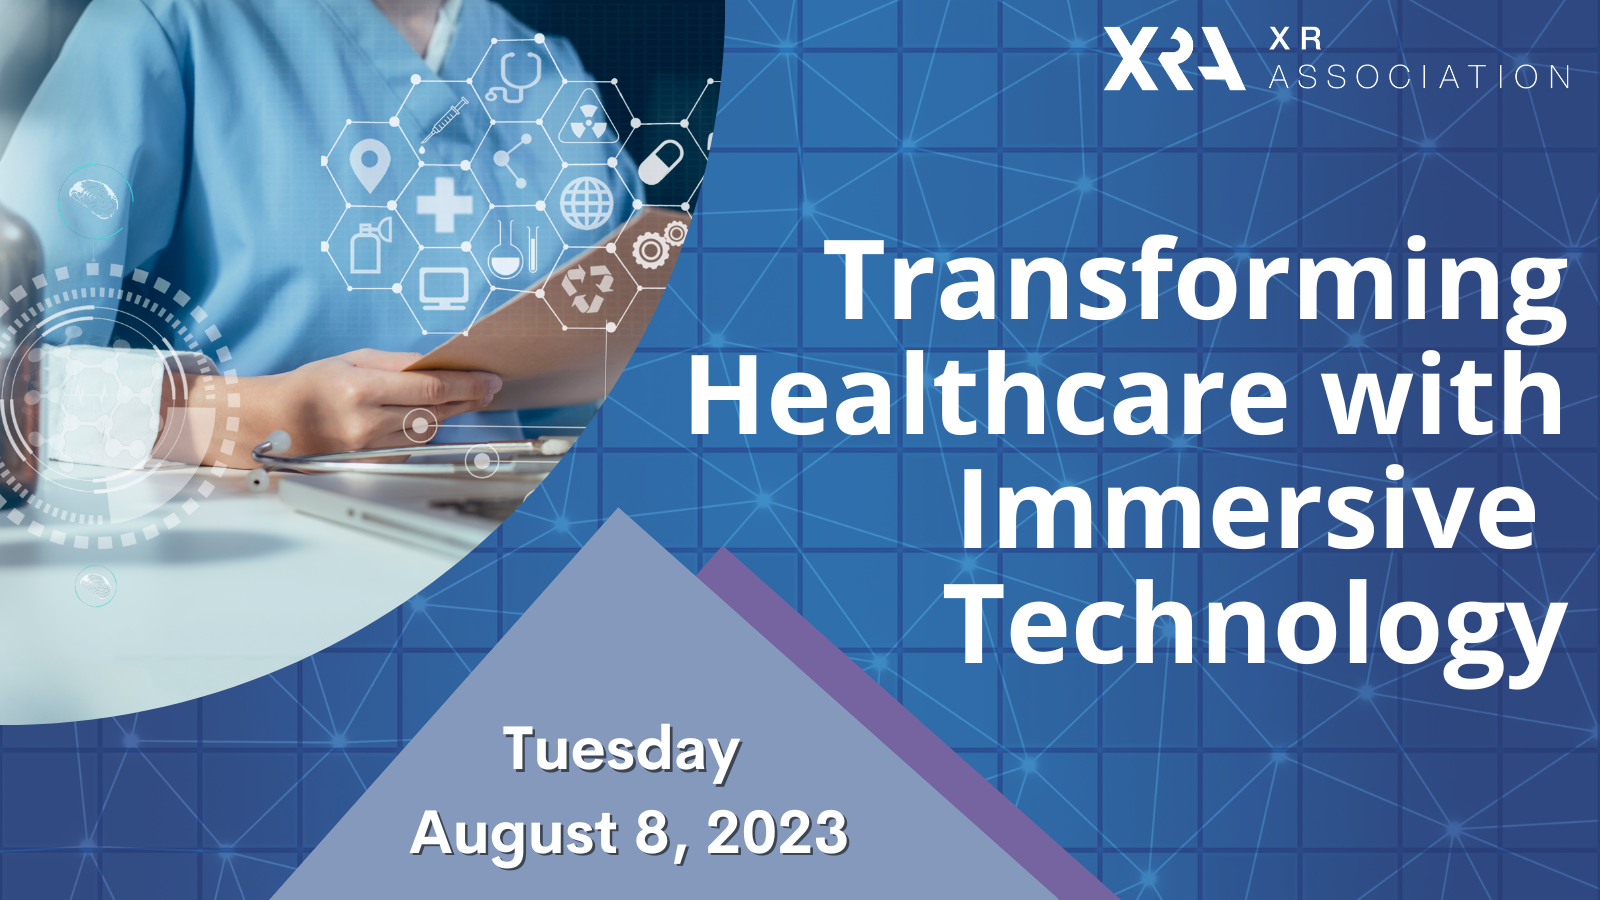 REPRESENTATITVE DEBBIE DINGELL TO GIVE OPENING REMARKS AT XRA’S HEALTHCARE WORKSHOP – AUG. 8 IN PLYMOUTH, MICHIGAN